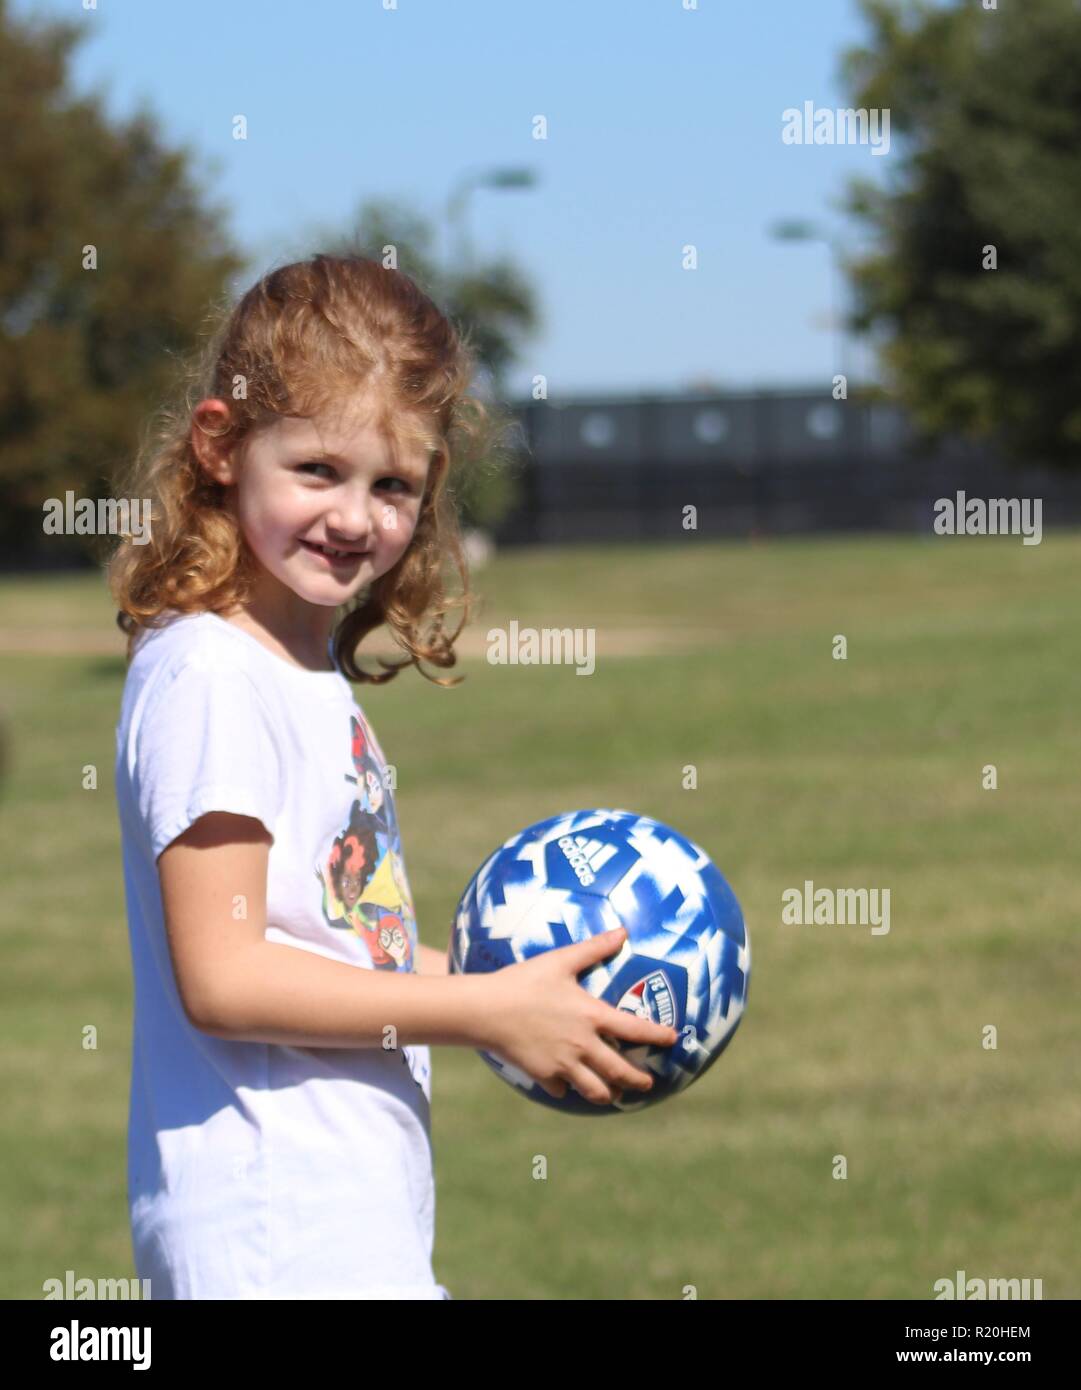 6 year old redheaded girl holding soccer ball Stock Photo